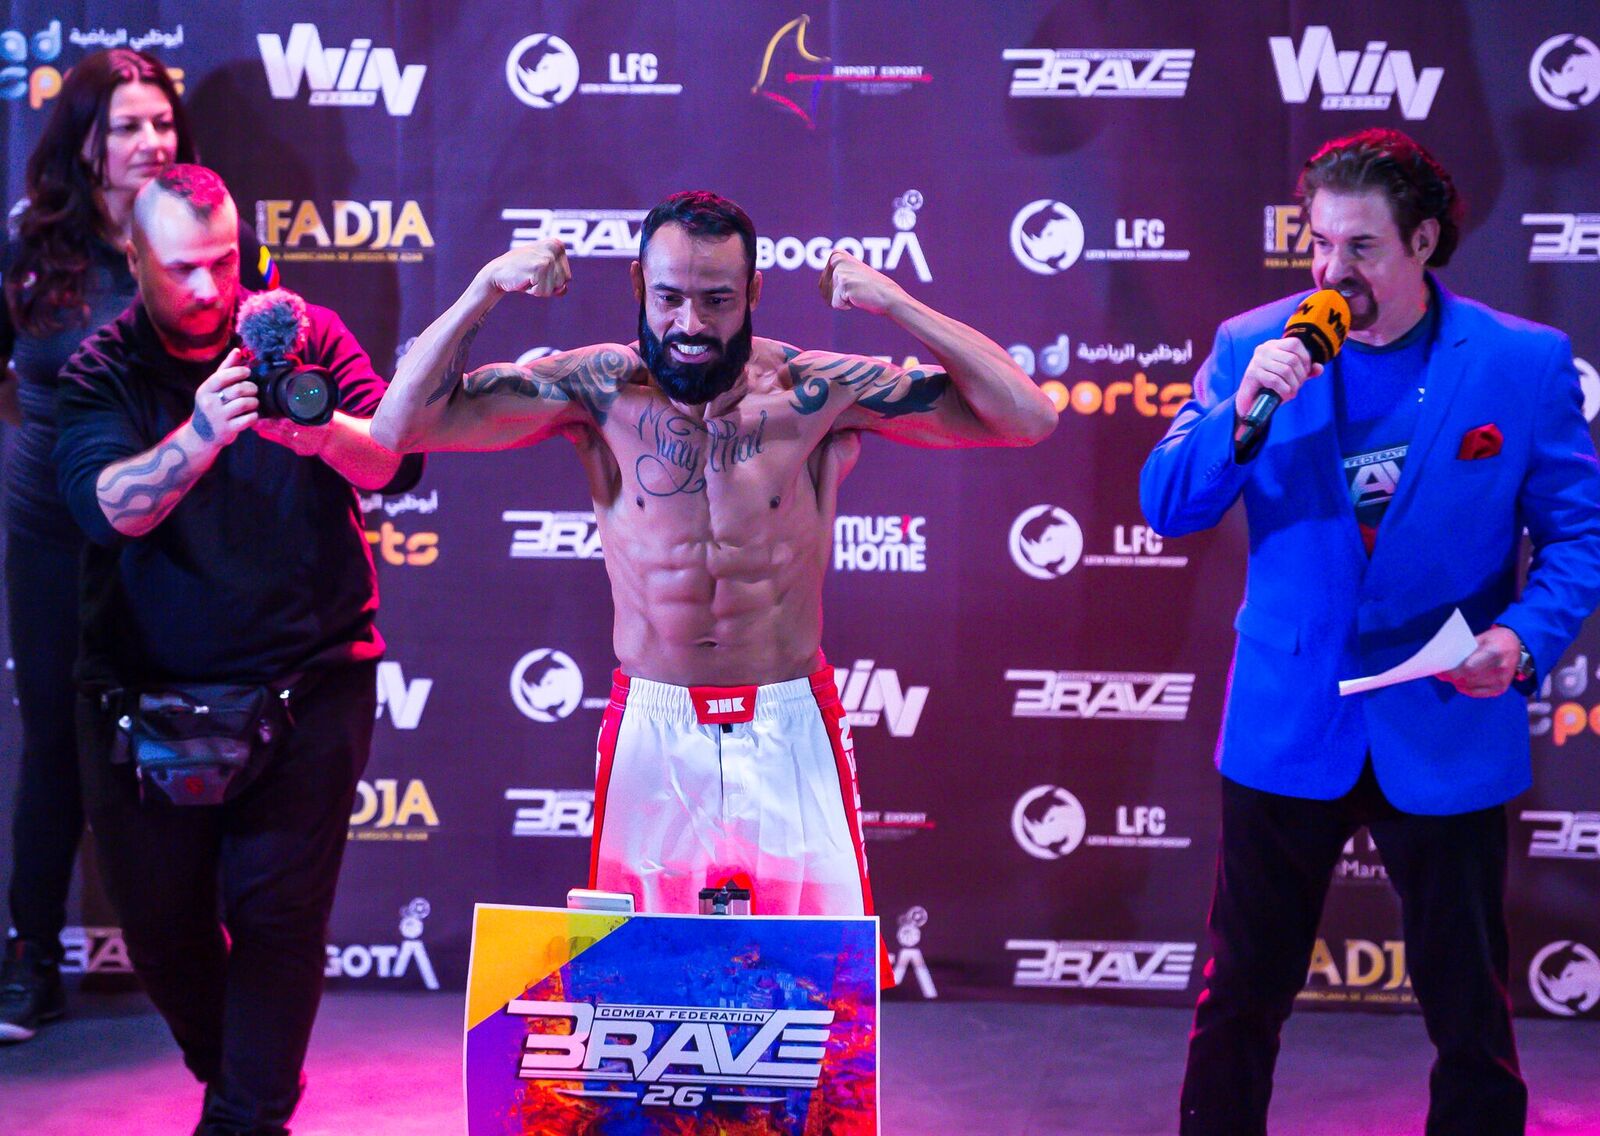 BRAVE 26 fighters light up Colombian crowd at ceremonial weigh-ins -